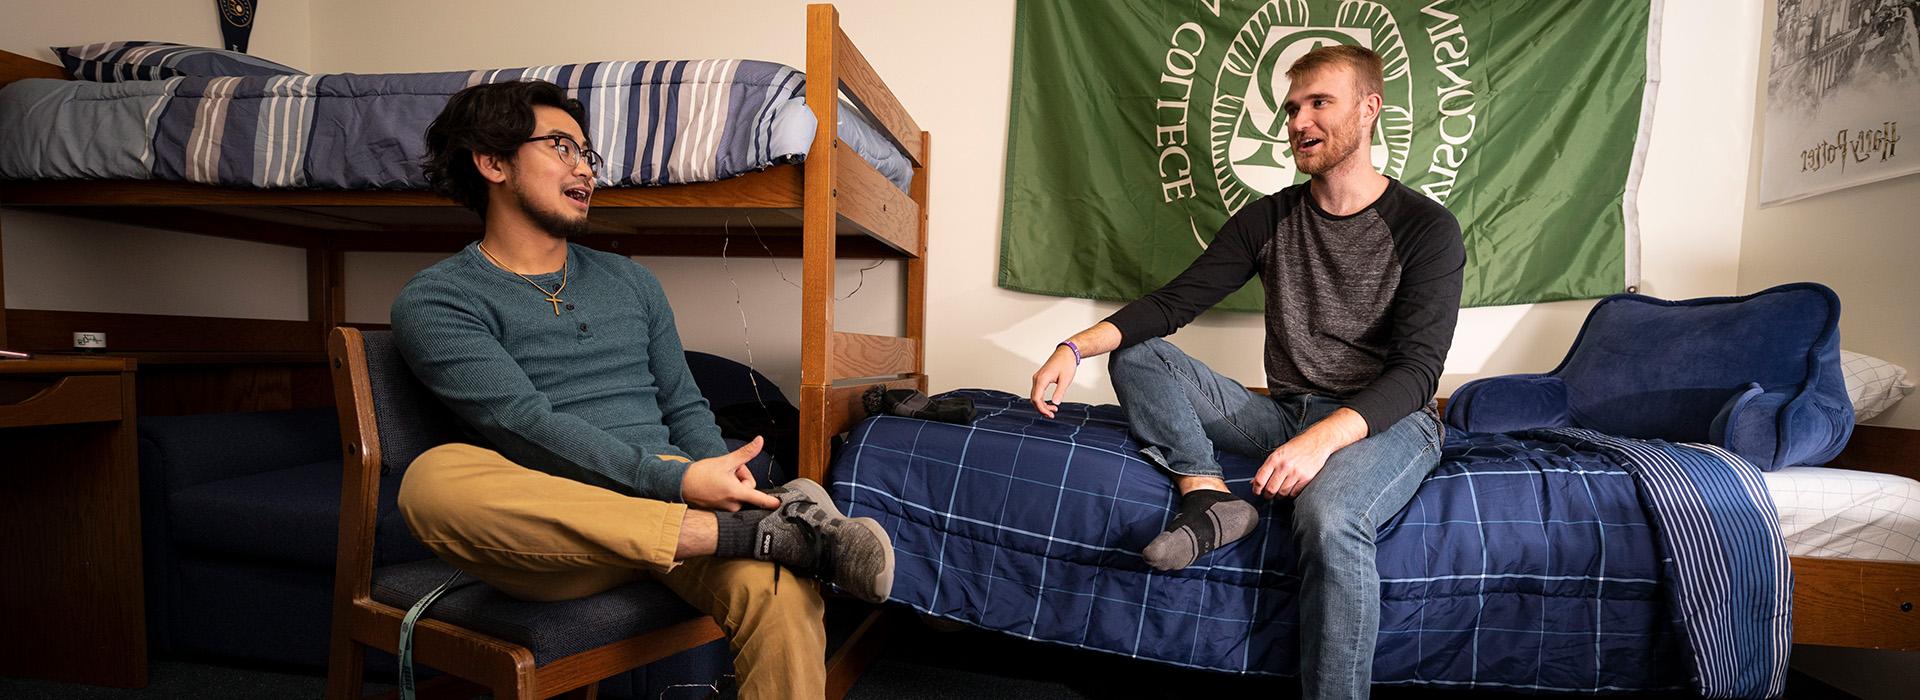 Two male students hanging out in a residence hall room